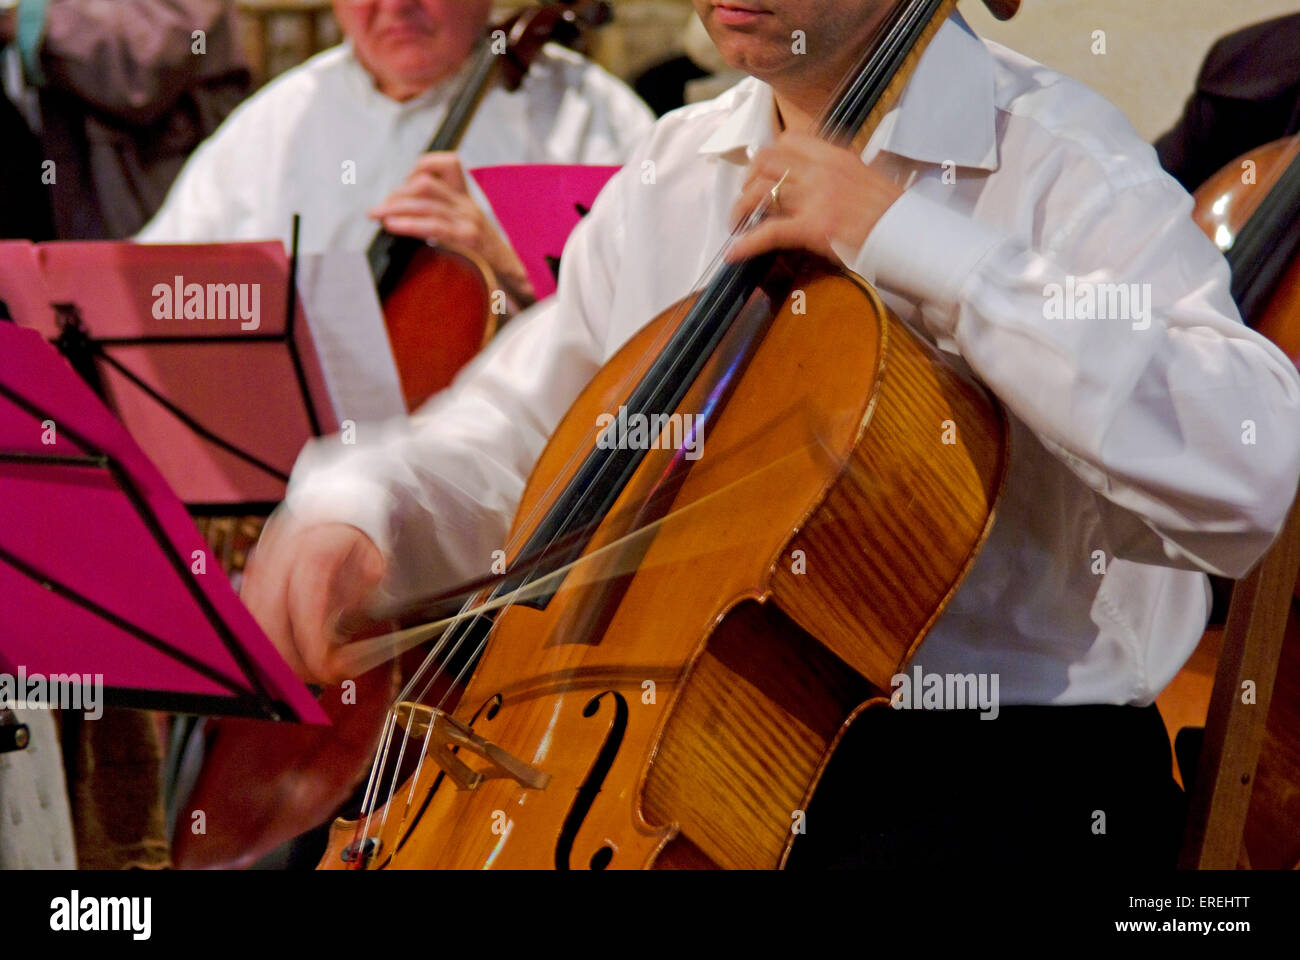 Close-up of cellist's hands in action, showing the vibrato movement of the left hand as well as the movement of the bow. Stock Photo